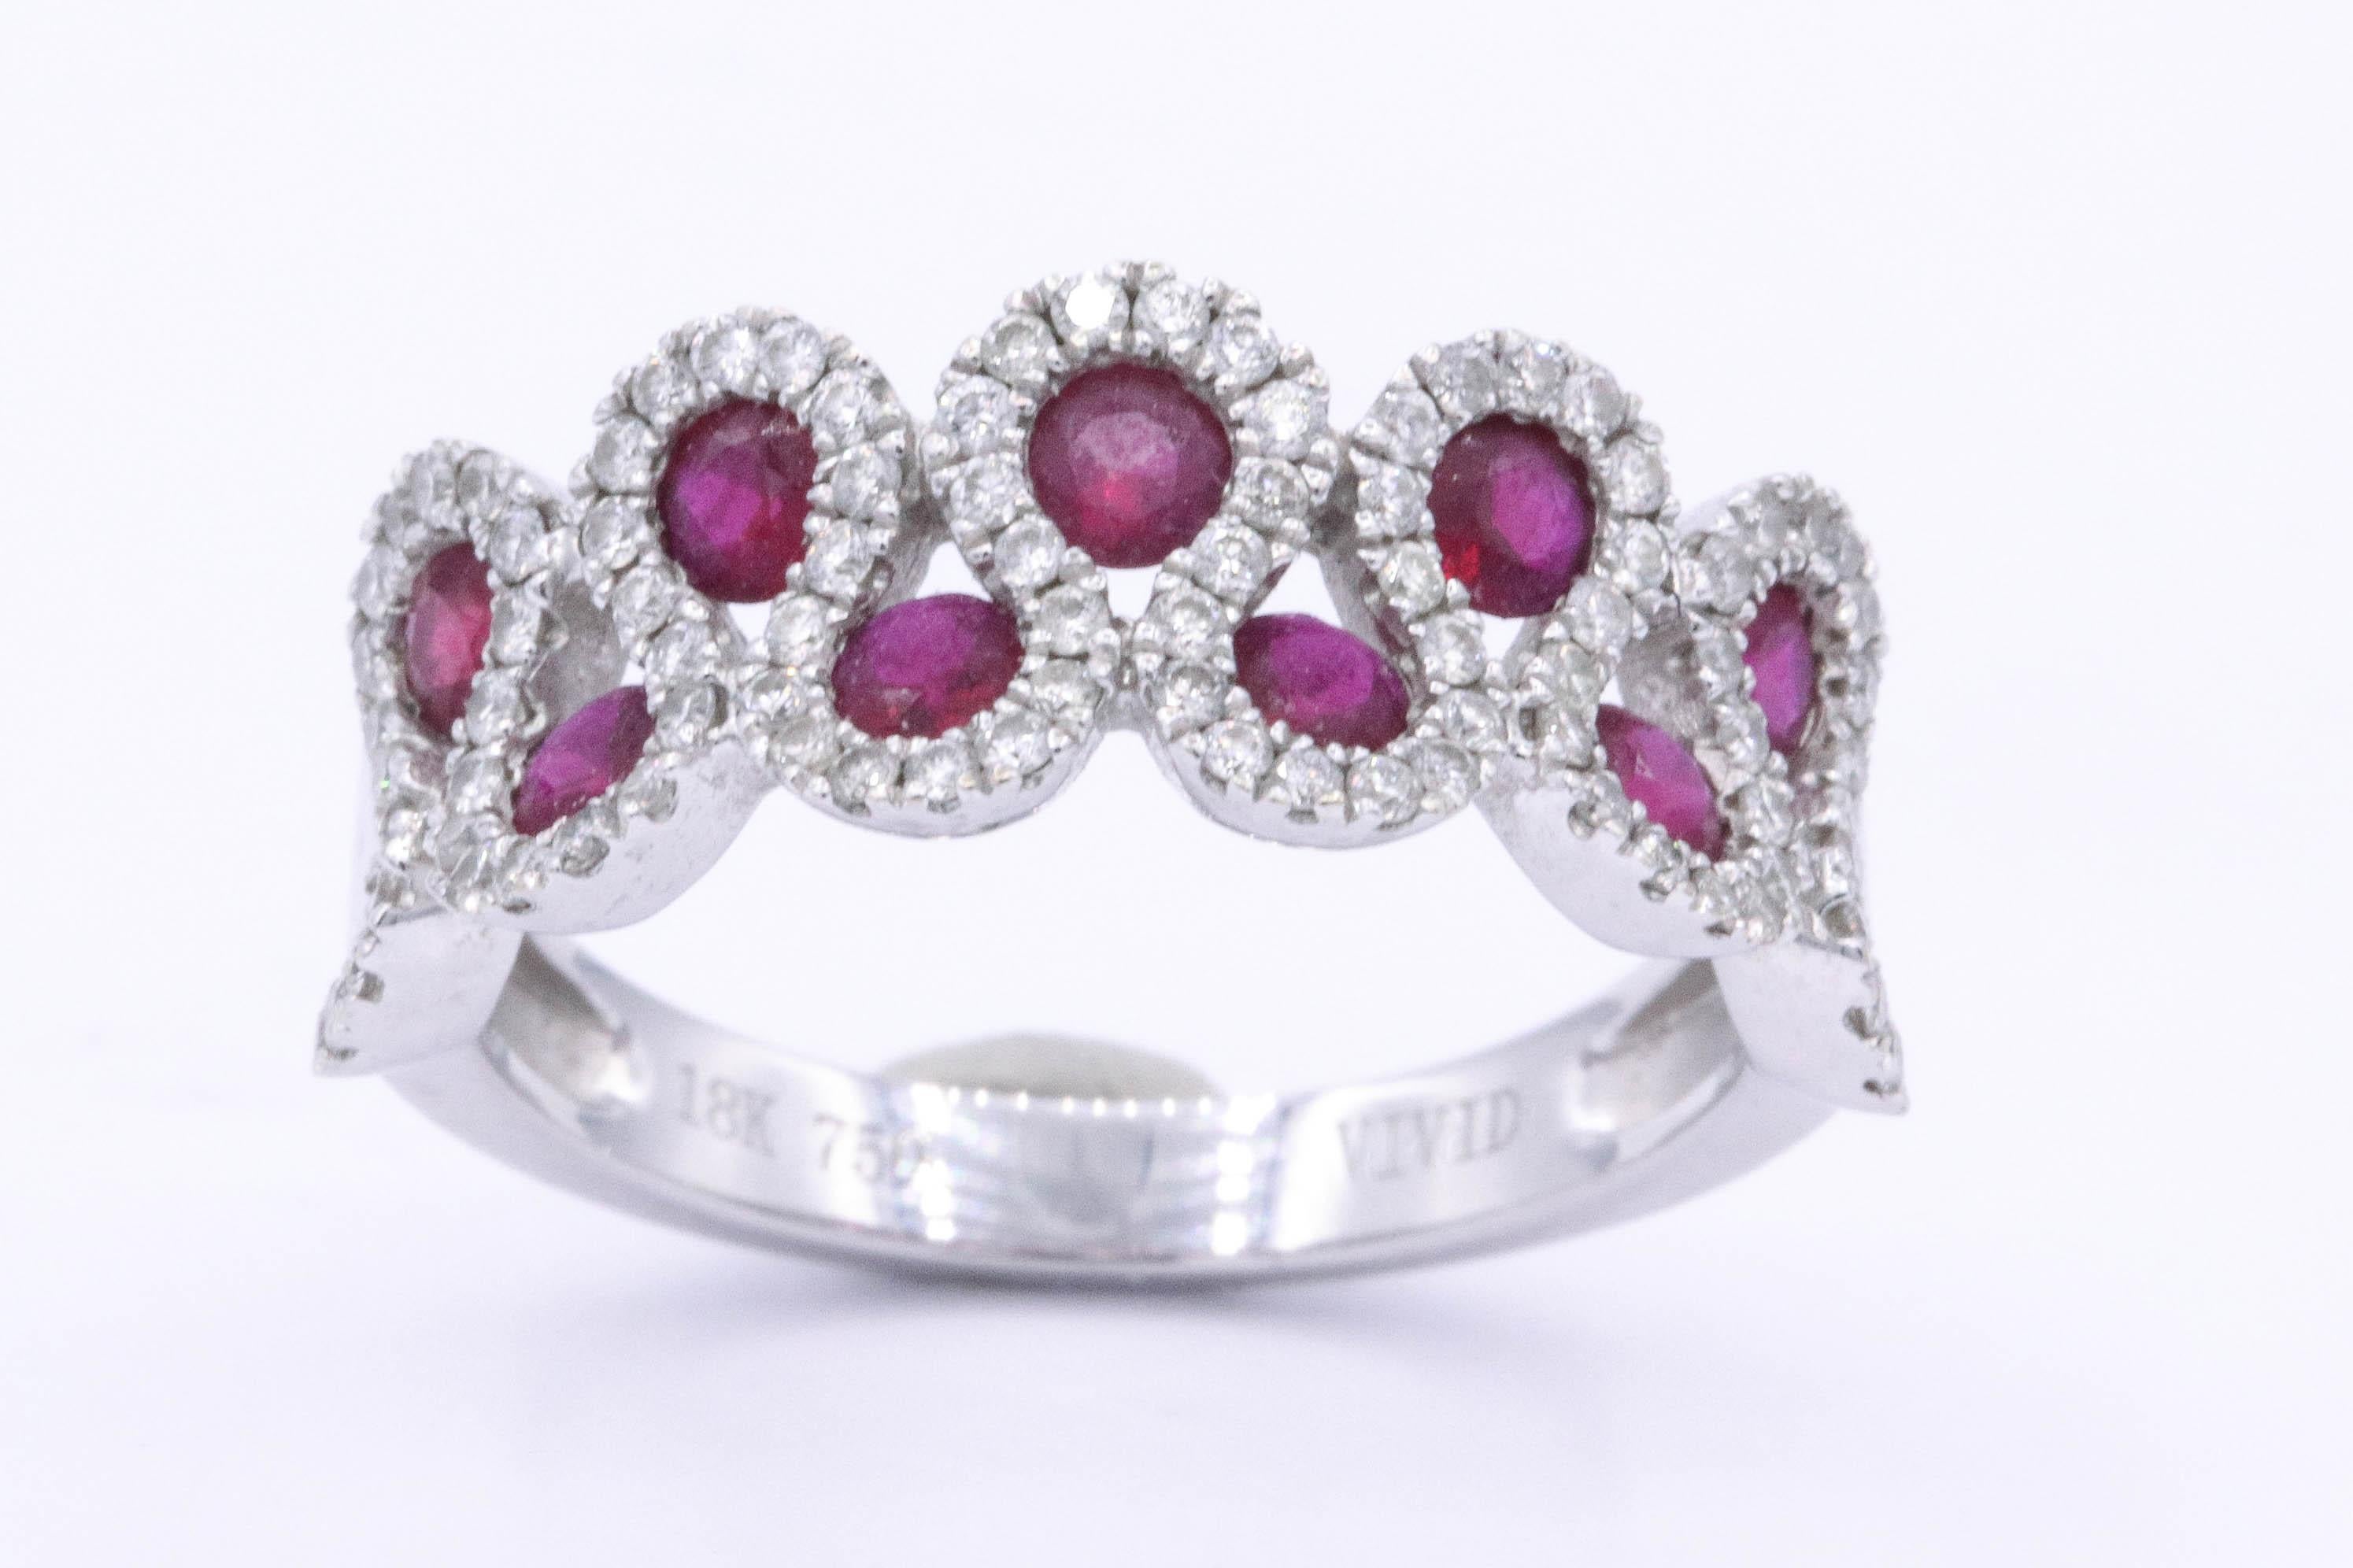 18K White Gold 
9 Ruby's 0.77 cts.
90 round diamonds 0.44 cts.